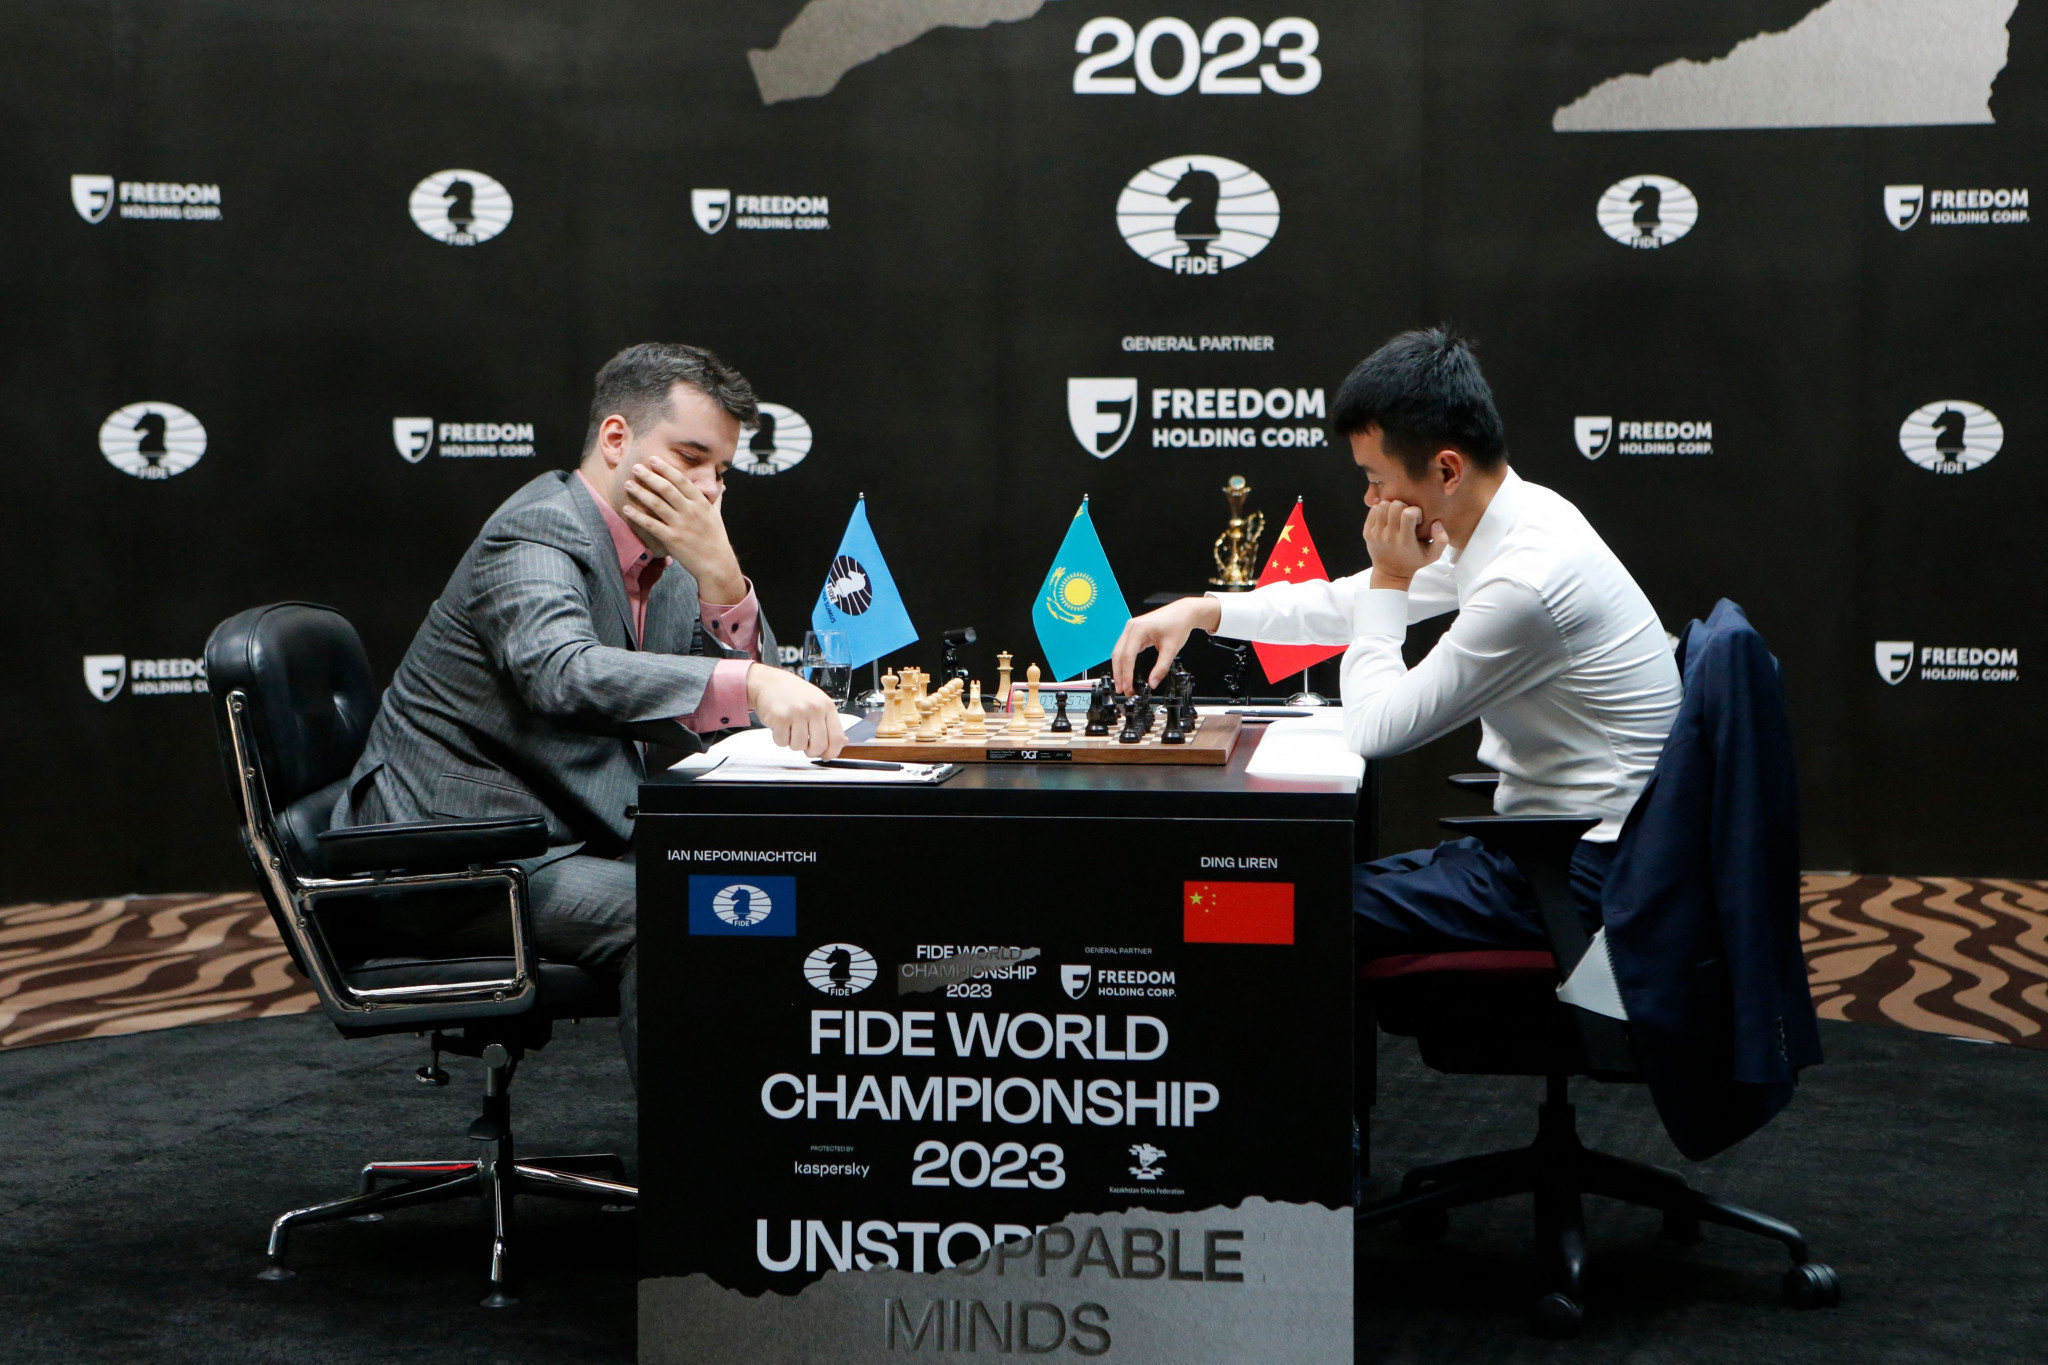 First game of FIDE World Championship Match ends in a draw